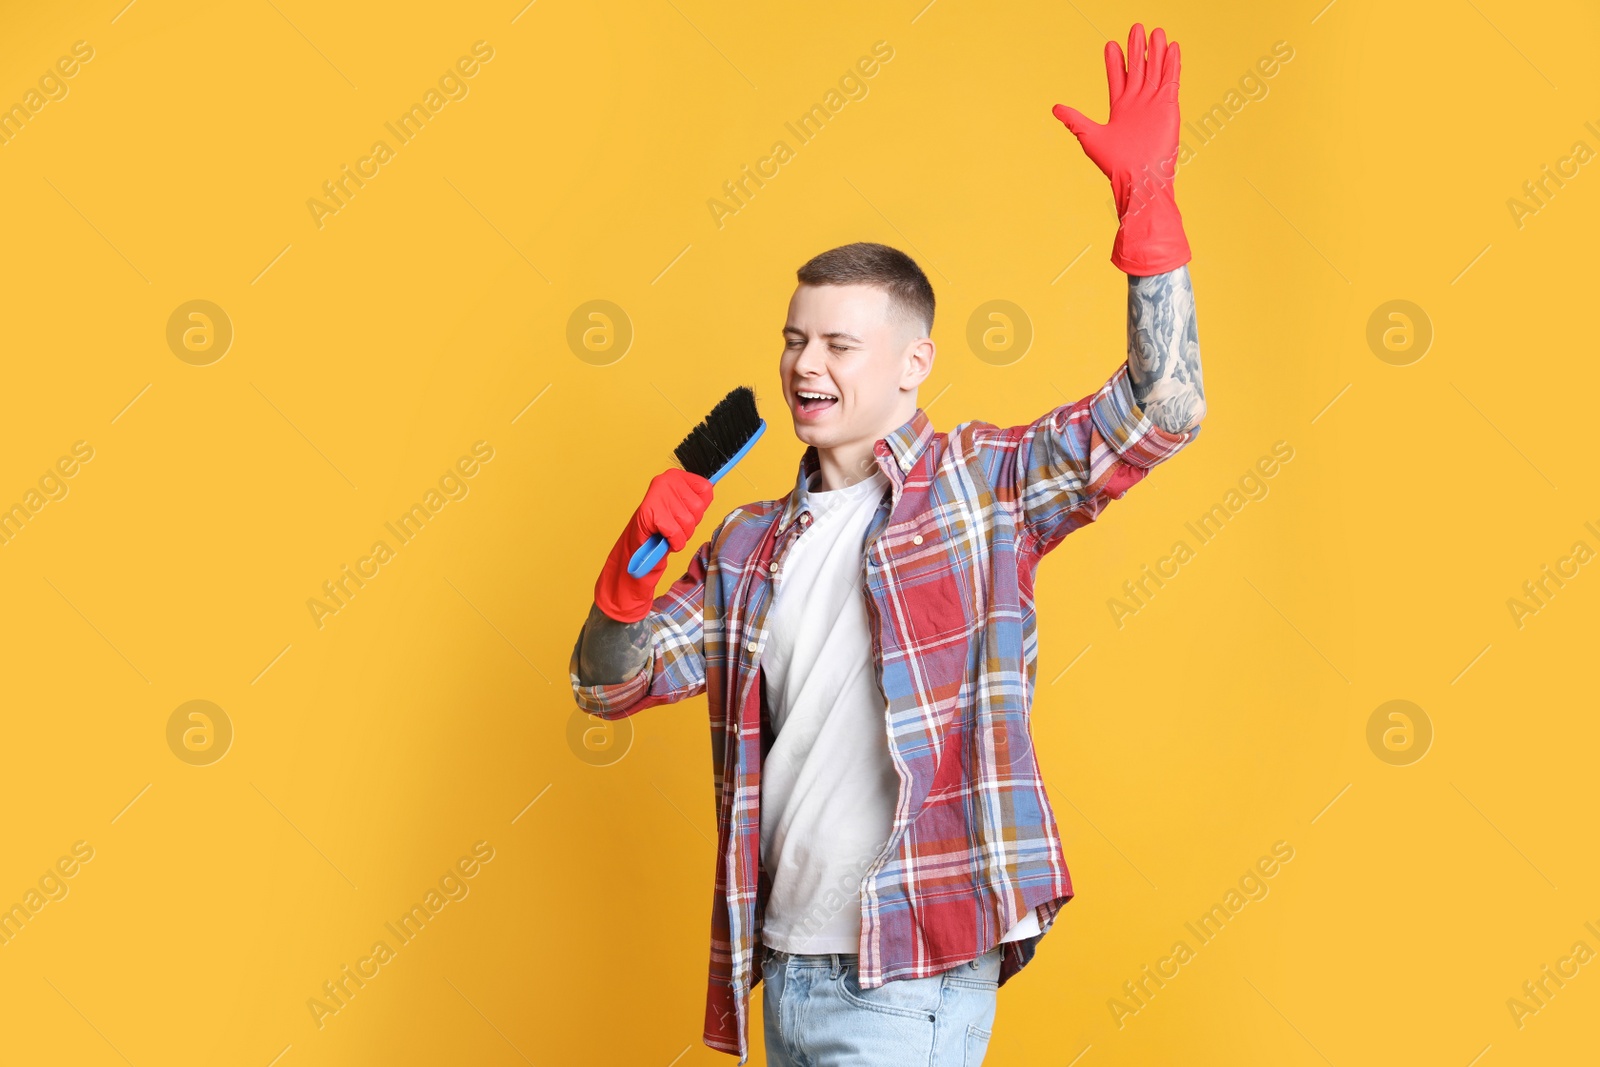 Photo of Handsome young man with brush singing on orange background